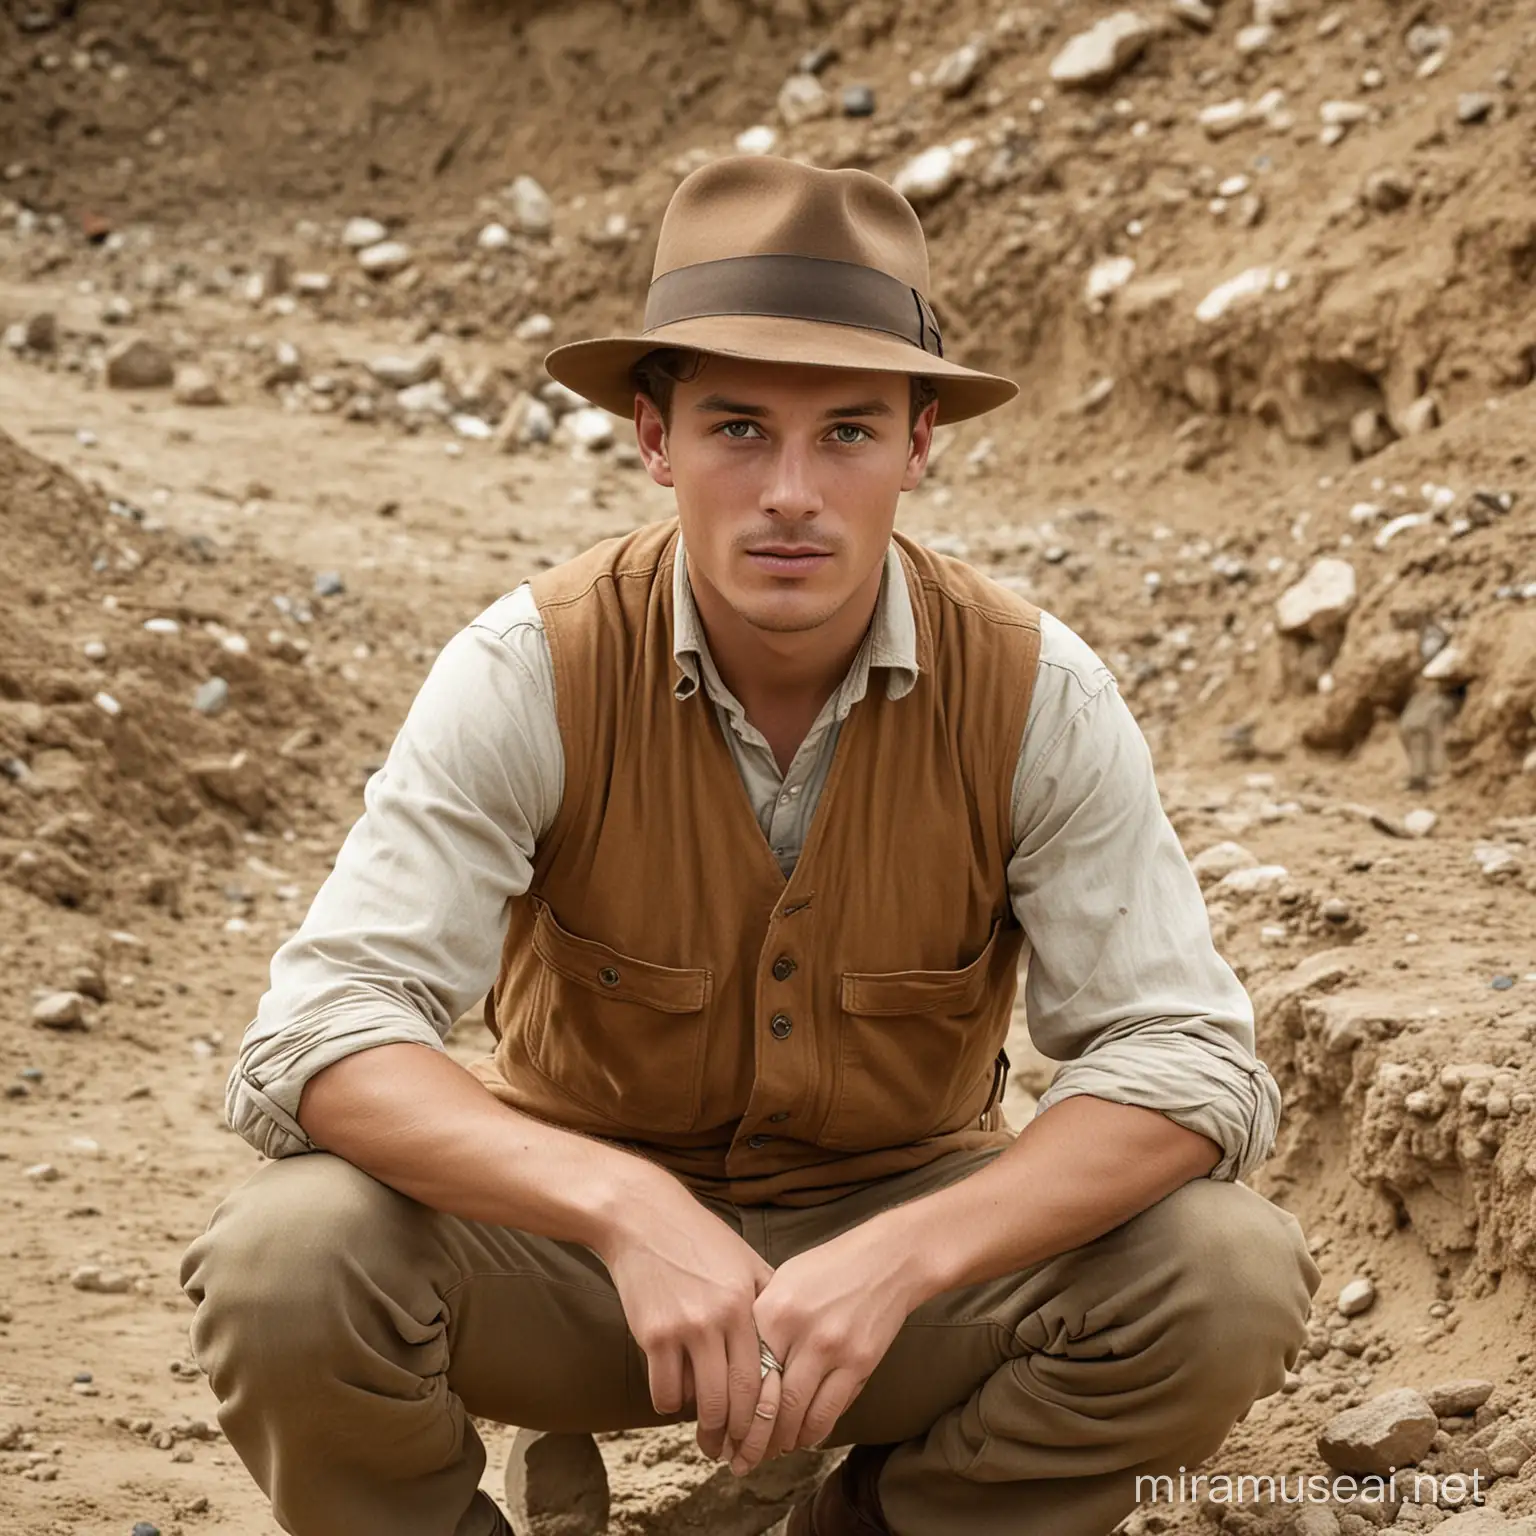 Young Archaeologist in 1920s Europe Excavation Site with Fedora Hat